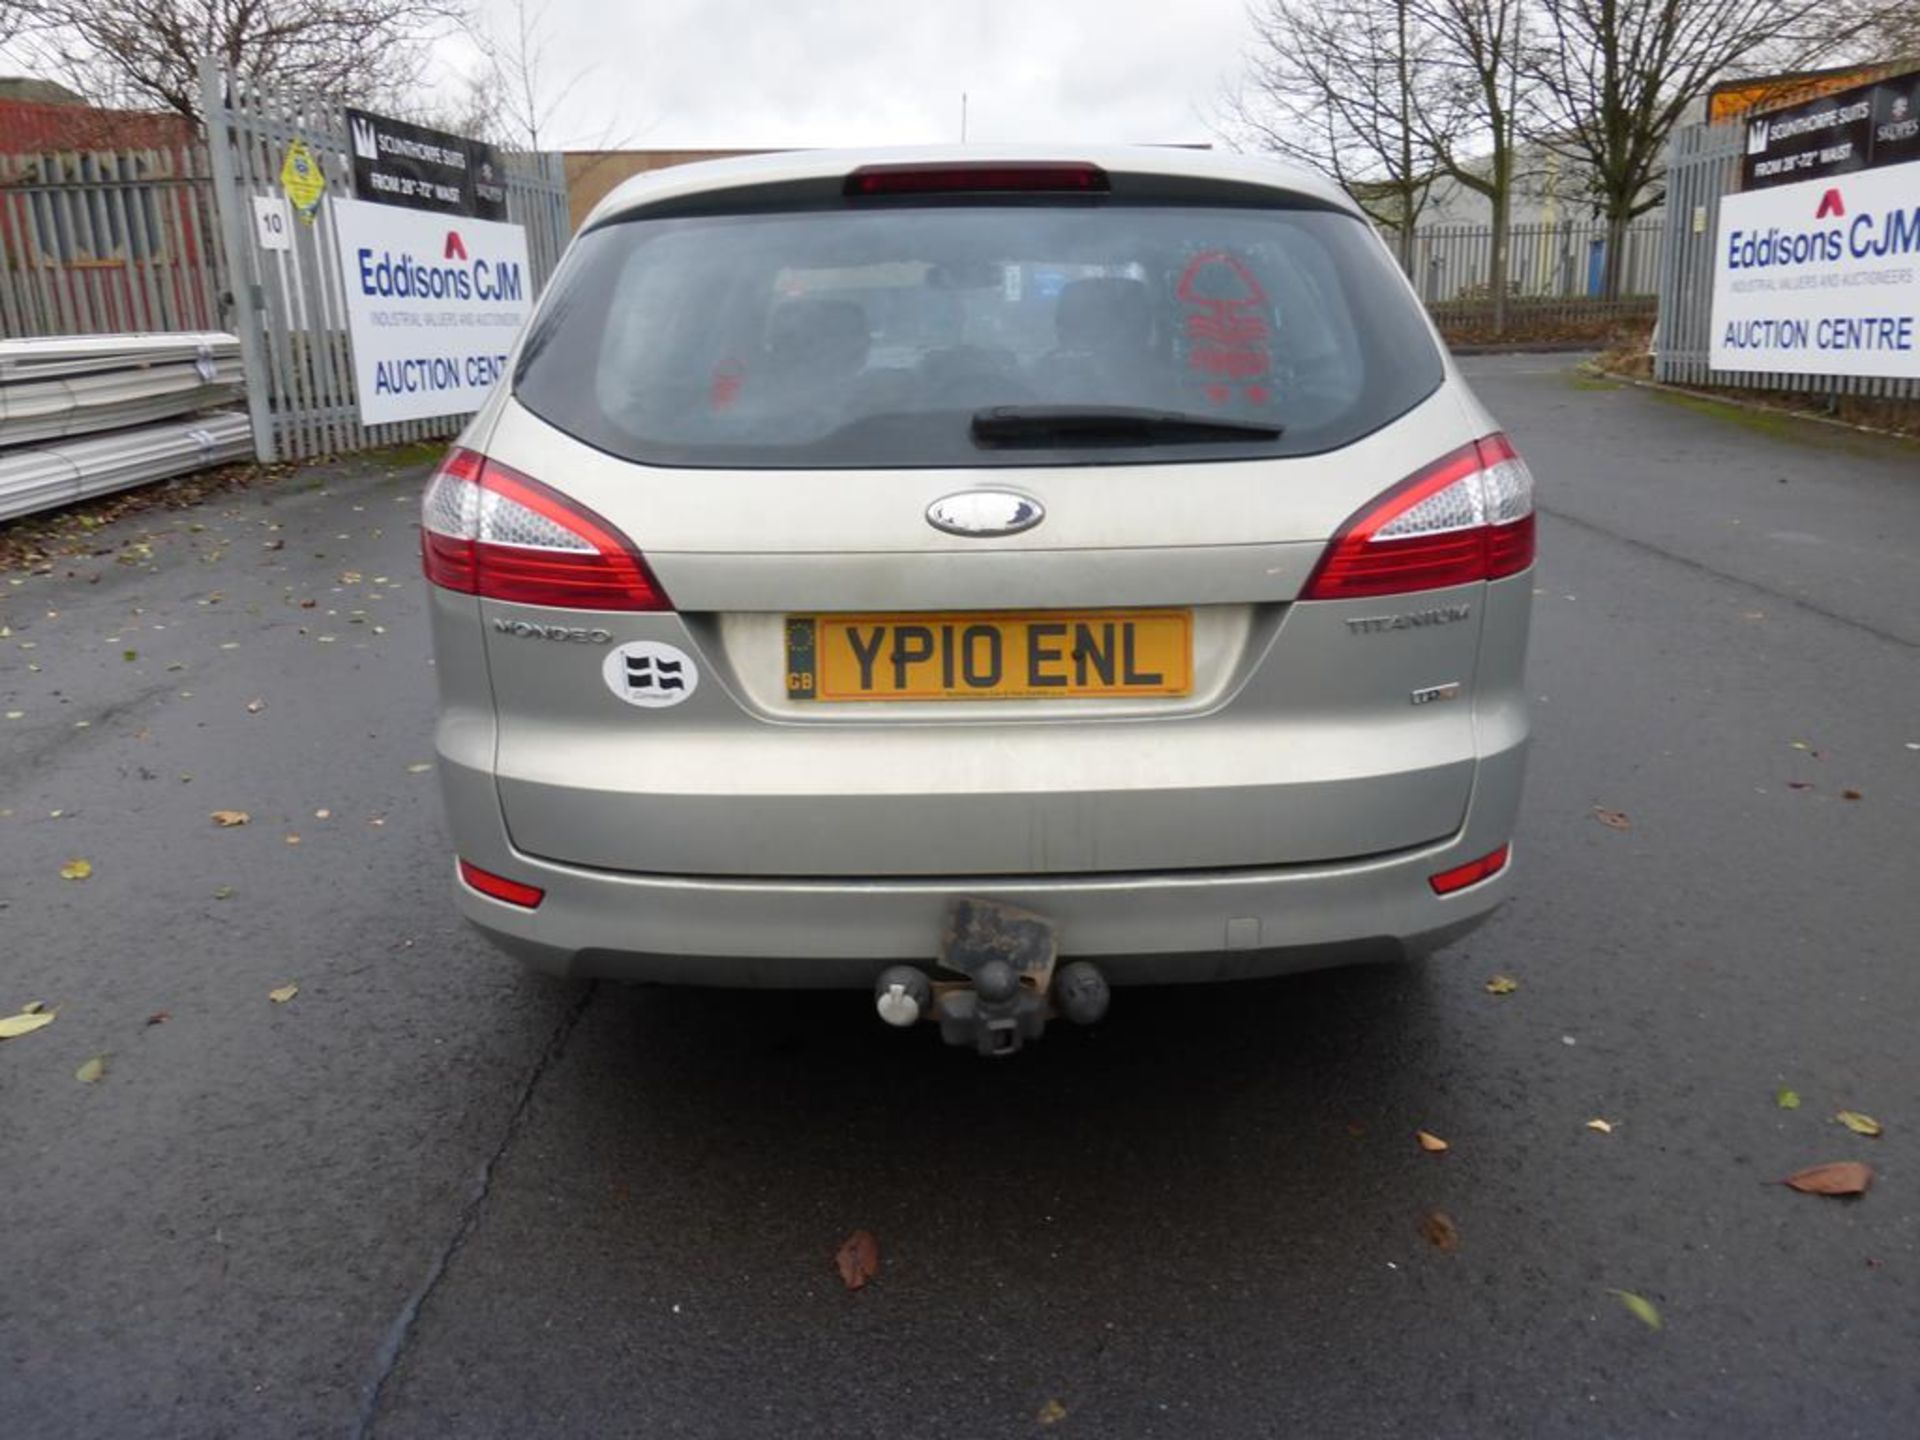 2010 Ford Mondeo Titanium 1997cc Diesel, 5 Door Estate, fitted with Tow Bar, Registration YP10 - Image 8 of 12